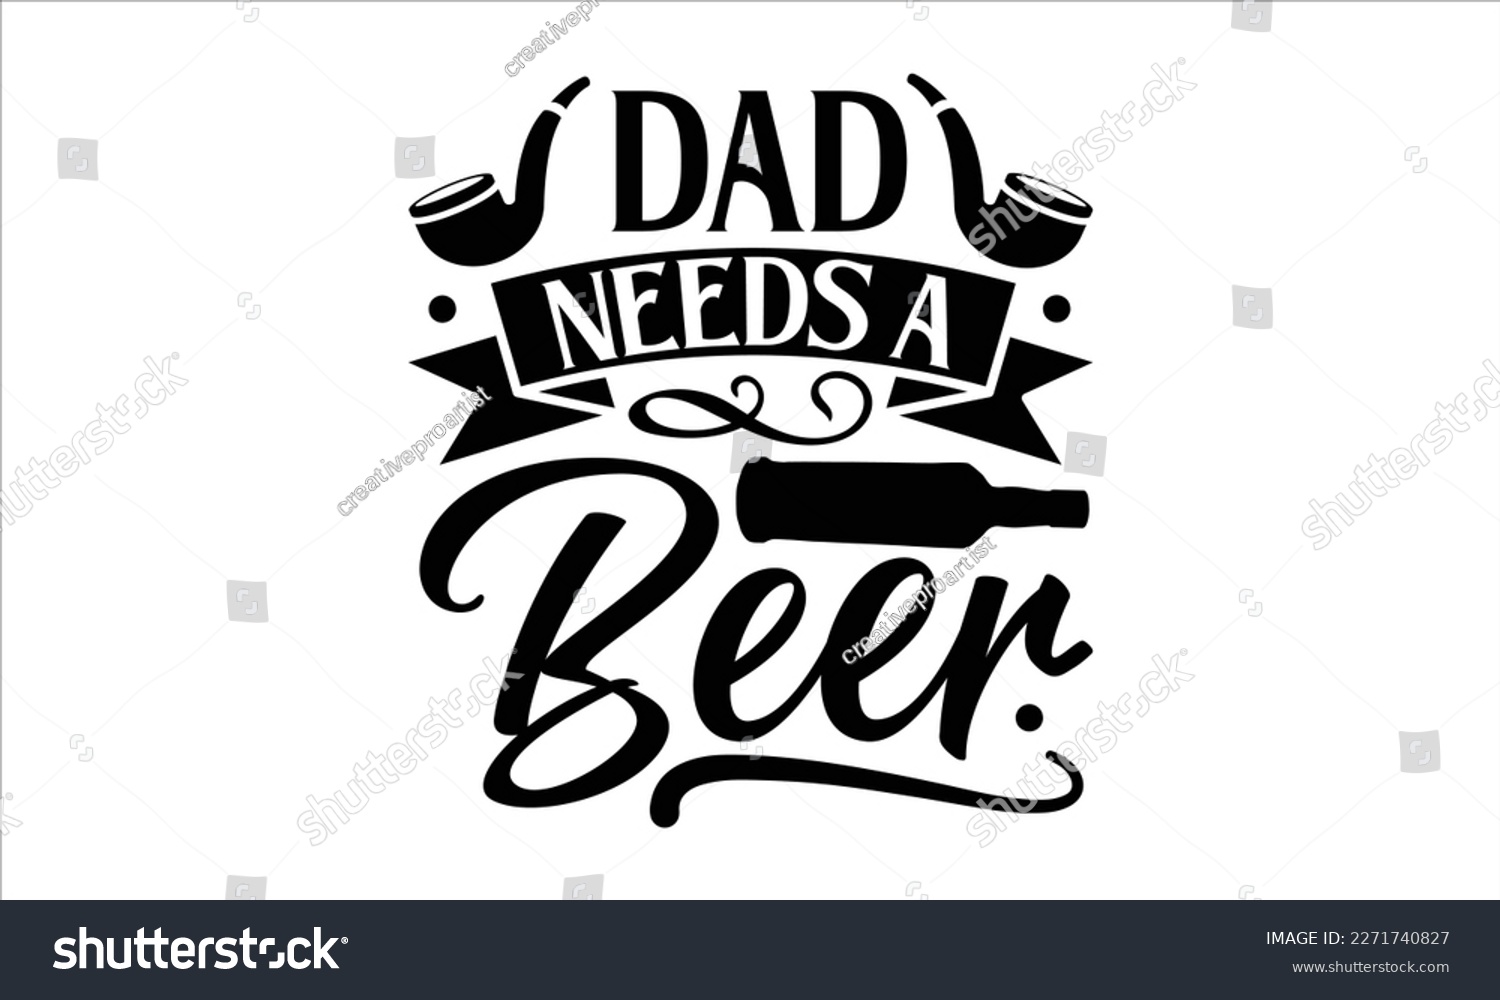 SVG of Dad needs a beer- Father's Day svg design, Hand drawn lettering phrase isolated on white background, Illustration for prints on t-shirts and bags, posters, cards eps 10. svg